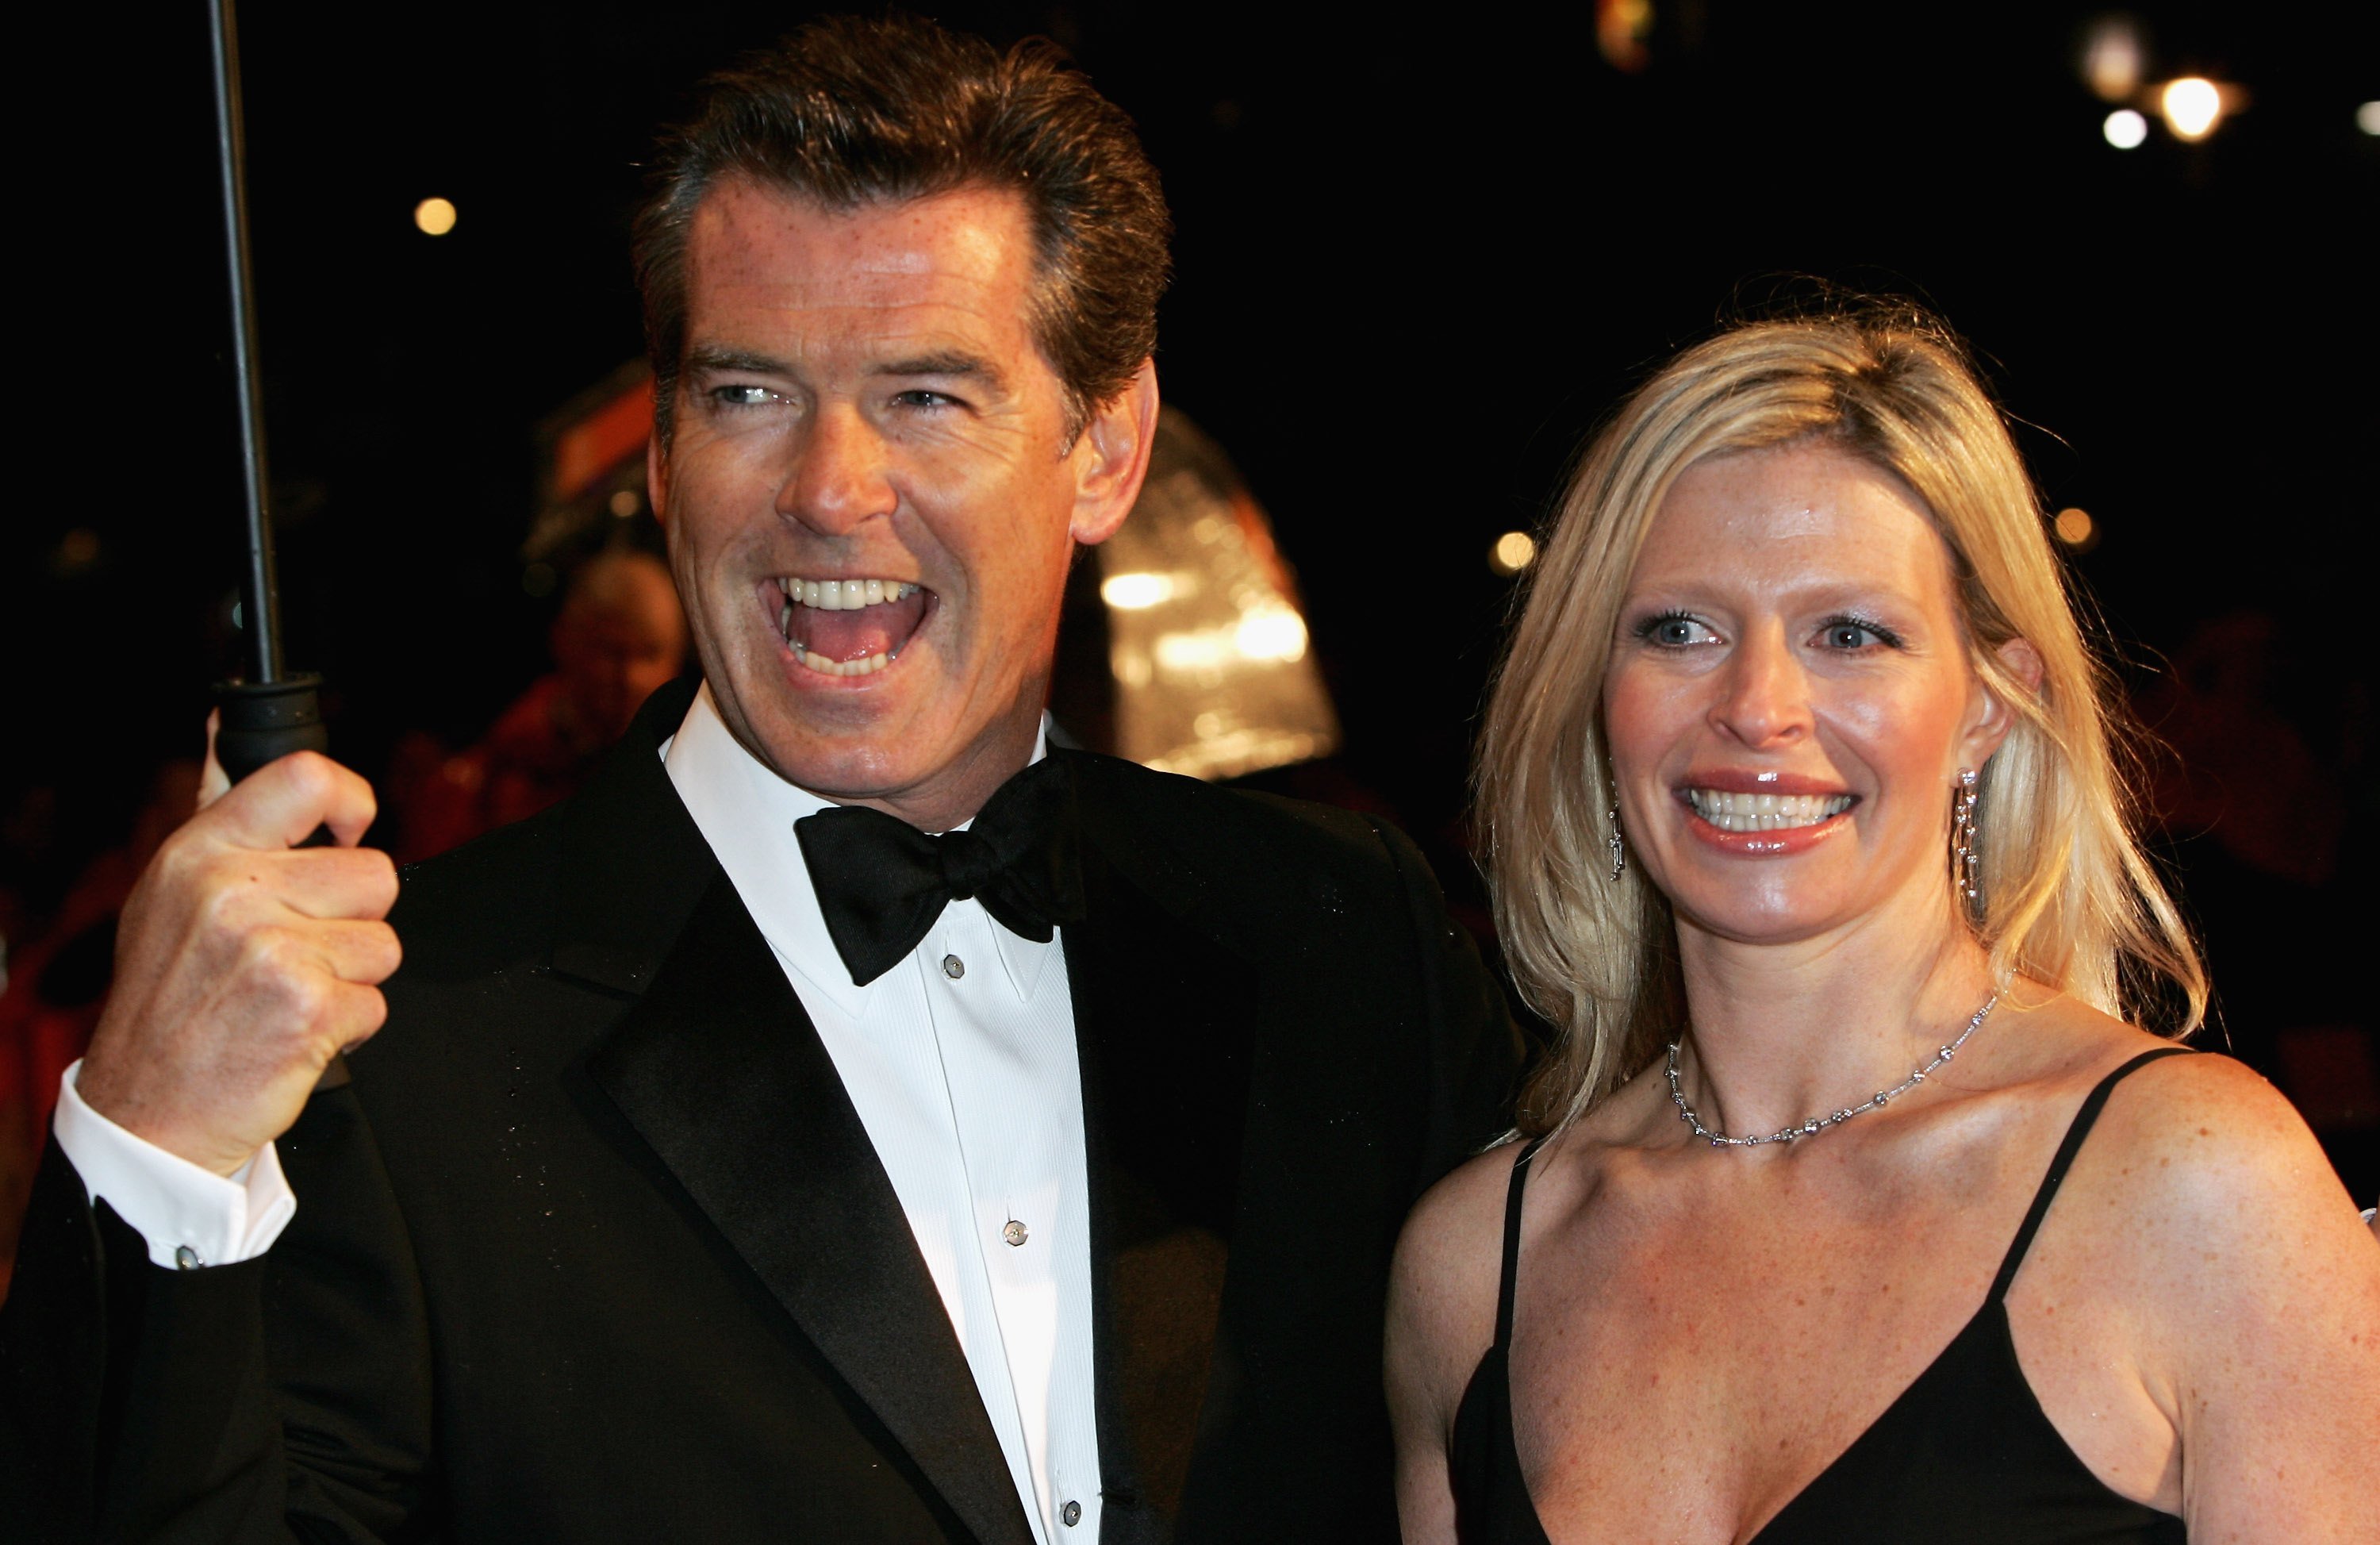 Actor Pierce Brosnan (left) and his daughter Charlotte arrive at the Orange British Academy Film Awards (BAFTA) at Odeon Leicester Square on February 19, 2006 in London, England.  |  Source: Getty Images